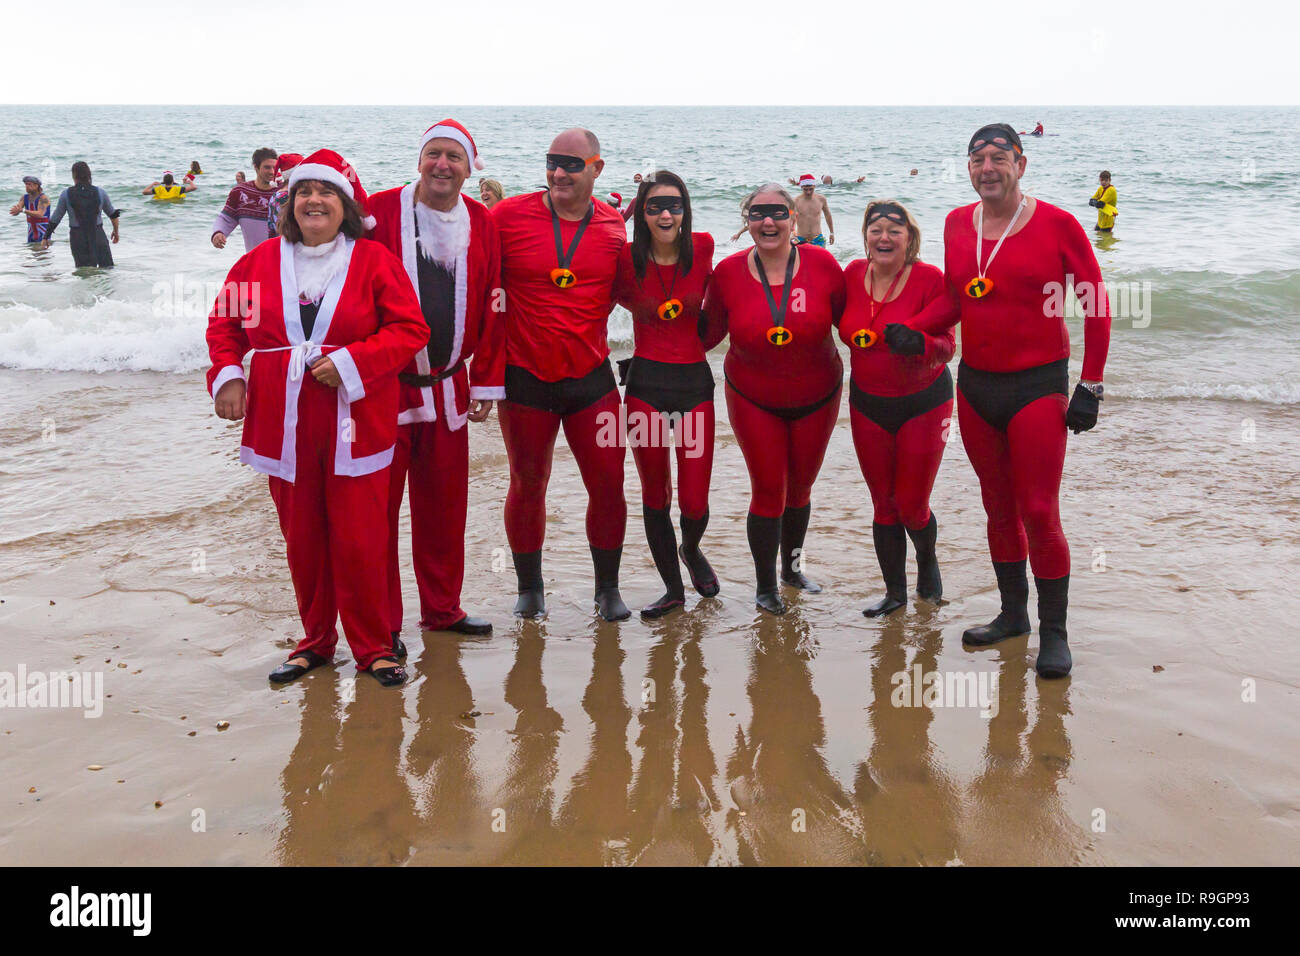 Boscombe, Bournemouth, Dorset, UK. Christmas Day 25th December 2018. Brave volunteers plunge into the cold choppy sea for a swim, for the annual charity White Christmas Dip, dressed in fancy dress costumes and raising money for Macmillan Caring Locally at Christchurch, a Specialist Palliative Care Unit for patients in the local community. Hundreds take part in the event which has become a popular tradition for many before their Christmas lunch. Credit: Carolyn Jenkins/Alamy Live News Stock Photo